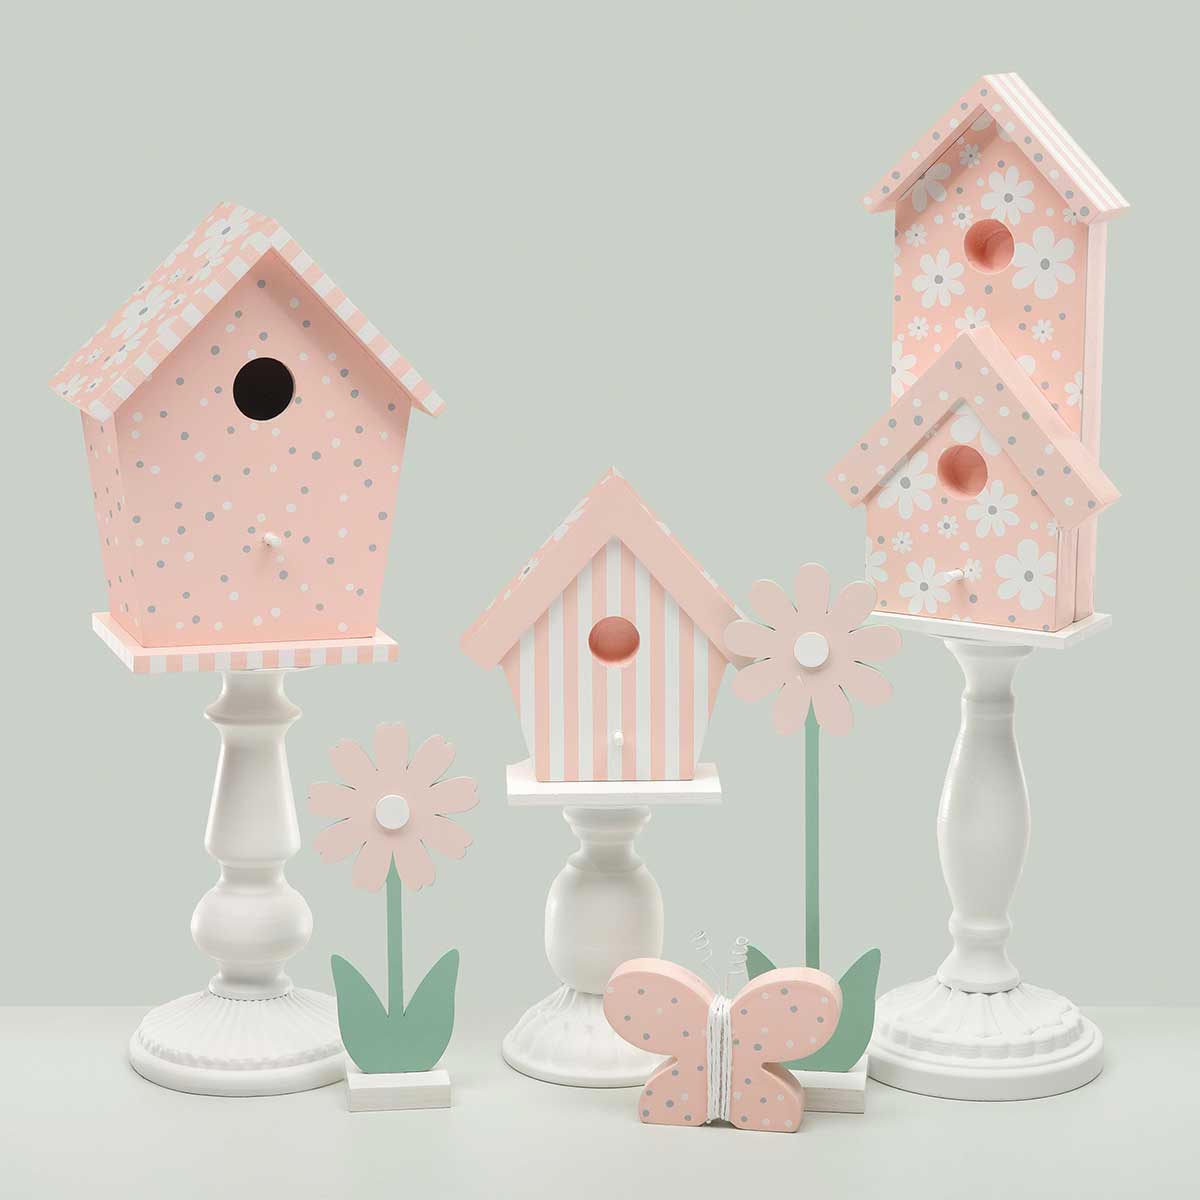 b50 BIRDHOUSE WHOOPSIE FLORA CONDO 5.5IN X 2.5IN X 10IN WOOD - Click Image to Close